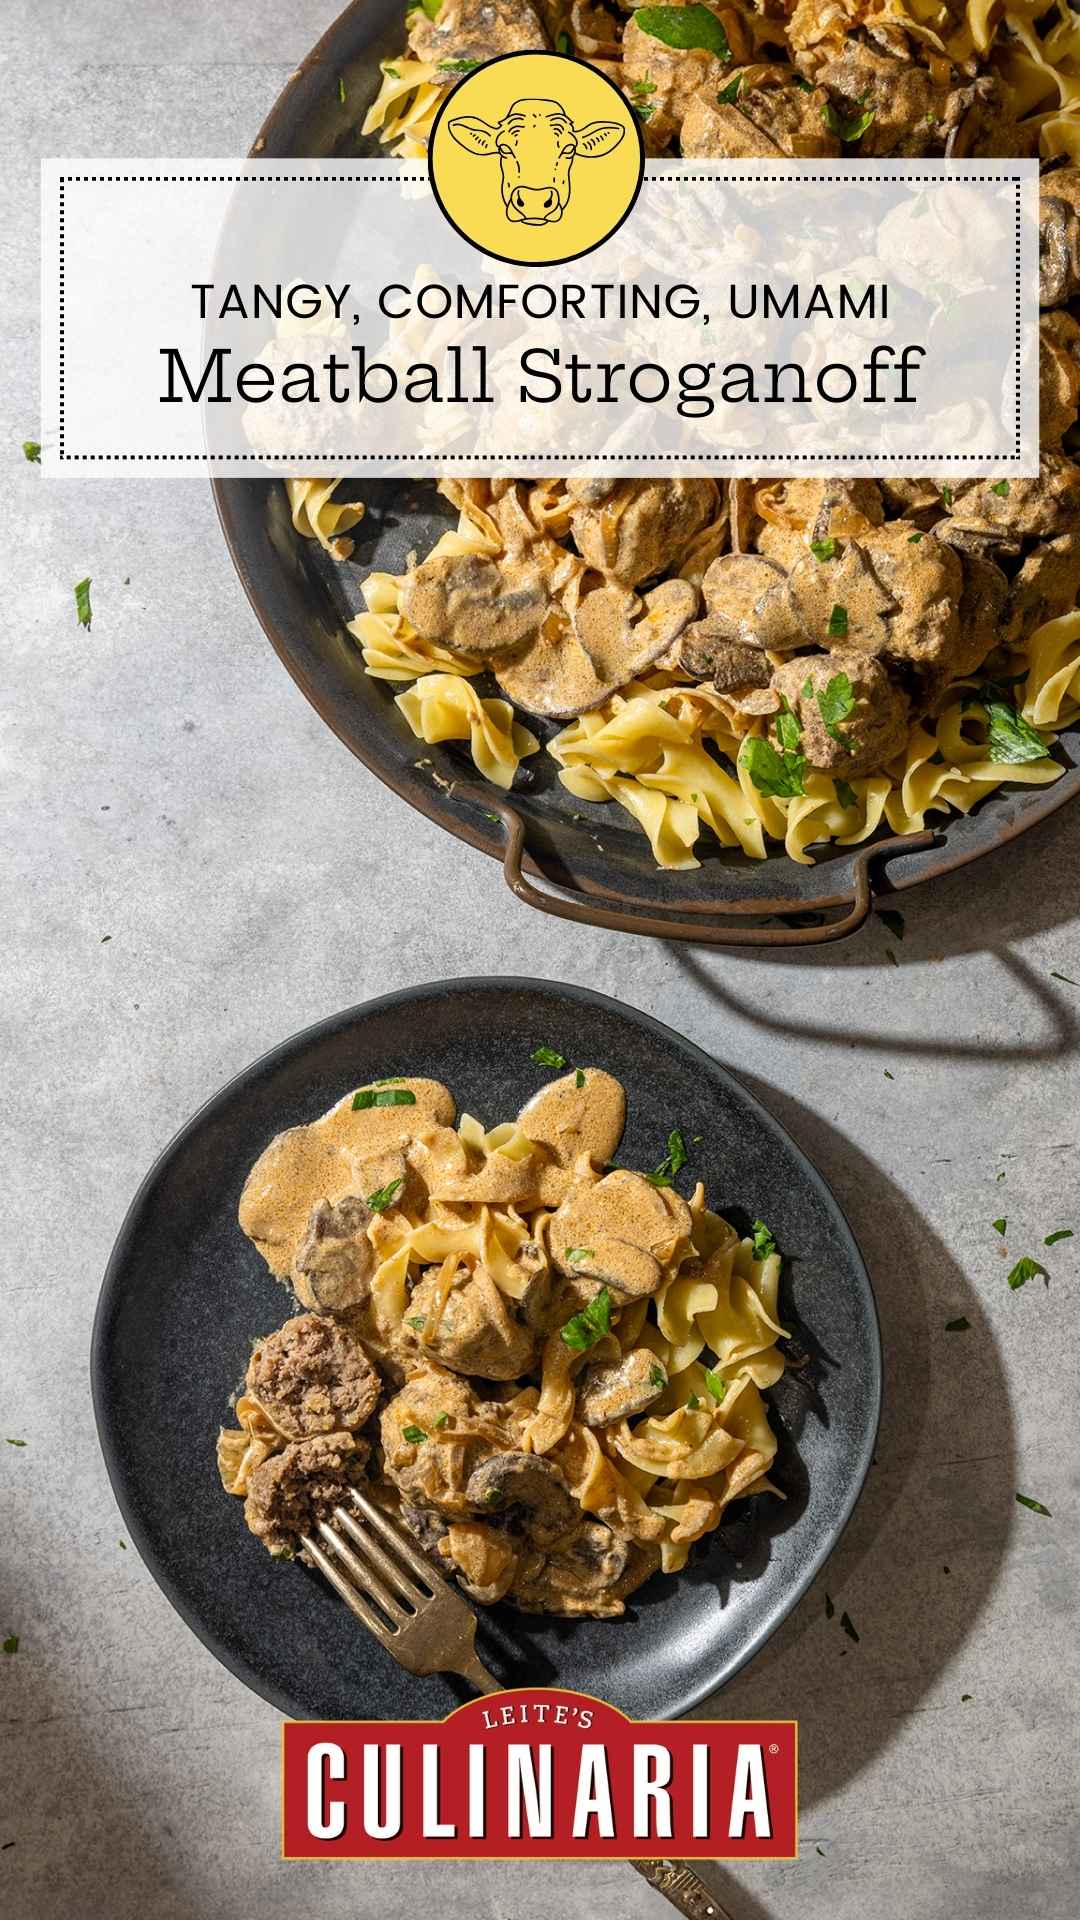 A platter of meatball Stroganoff over buttered noodles next to a black plate filled with the same.